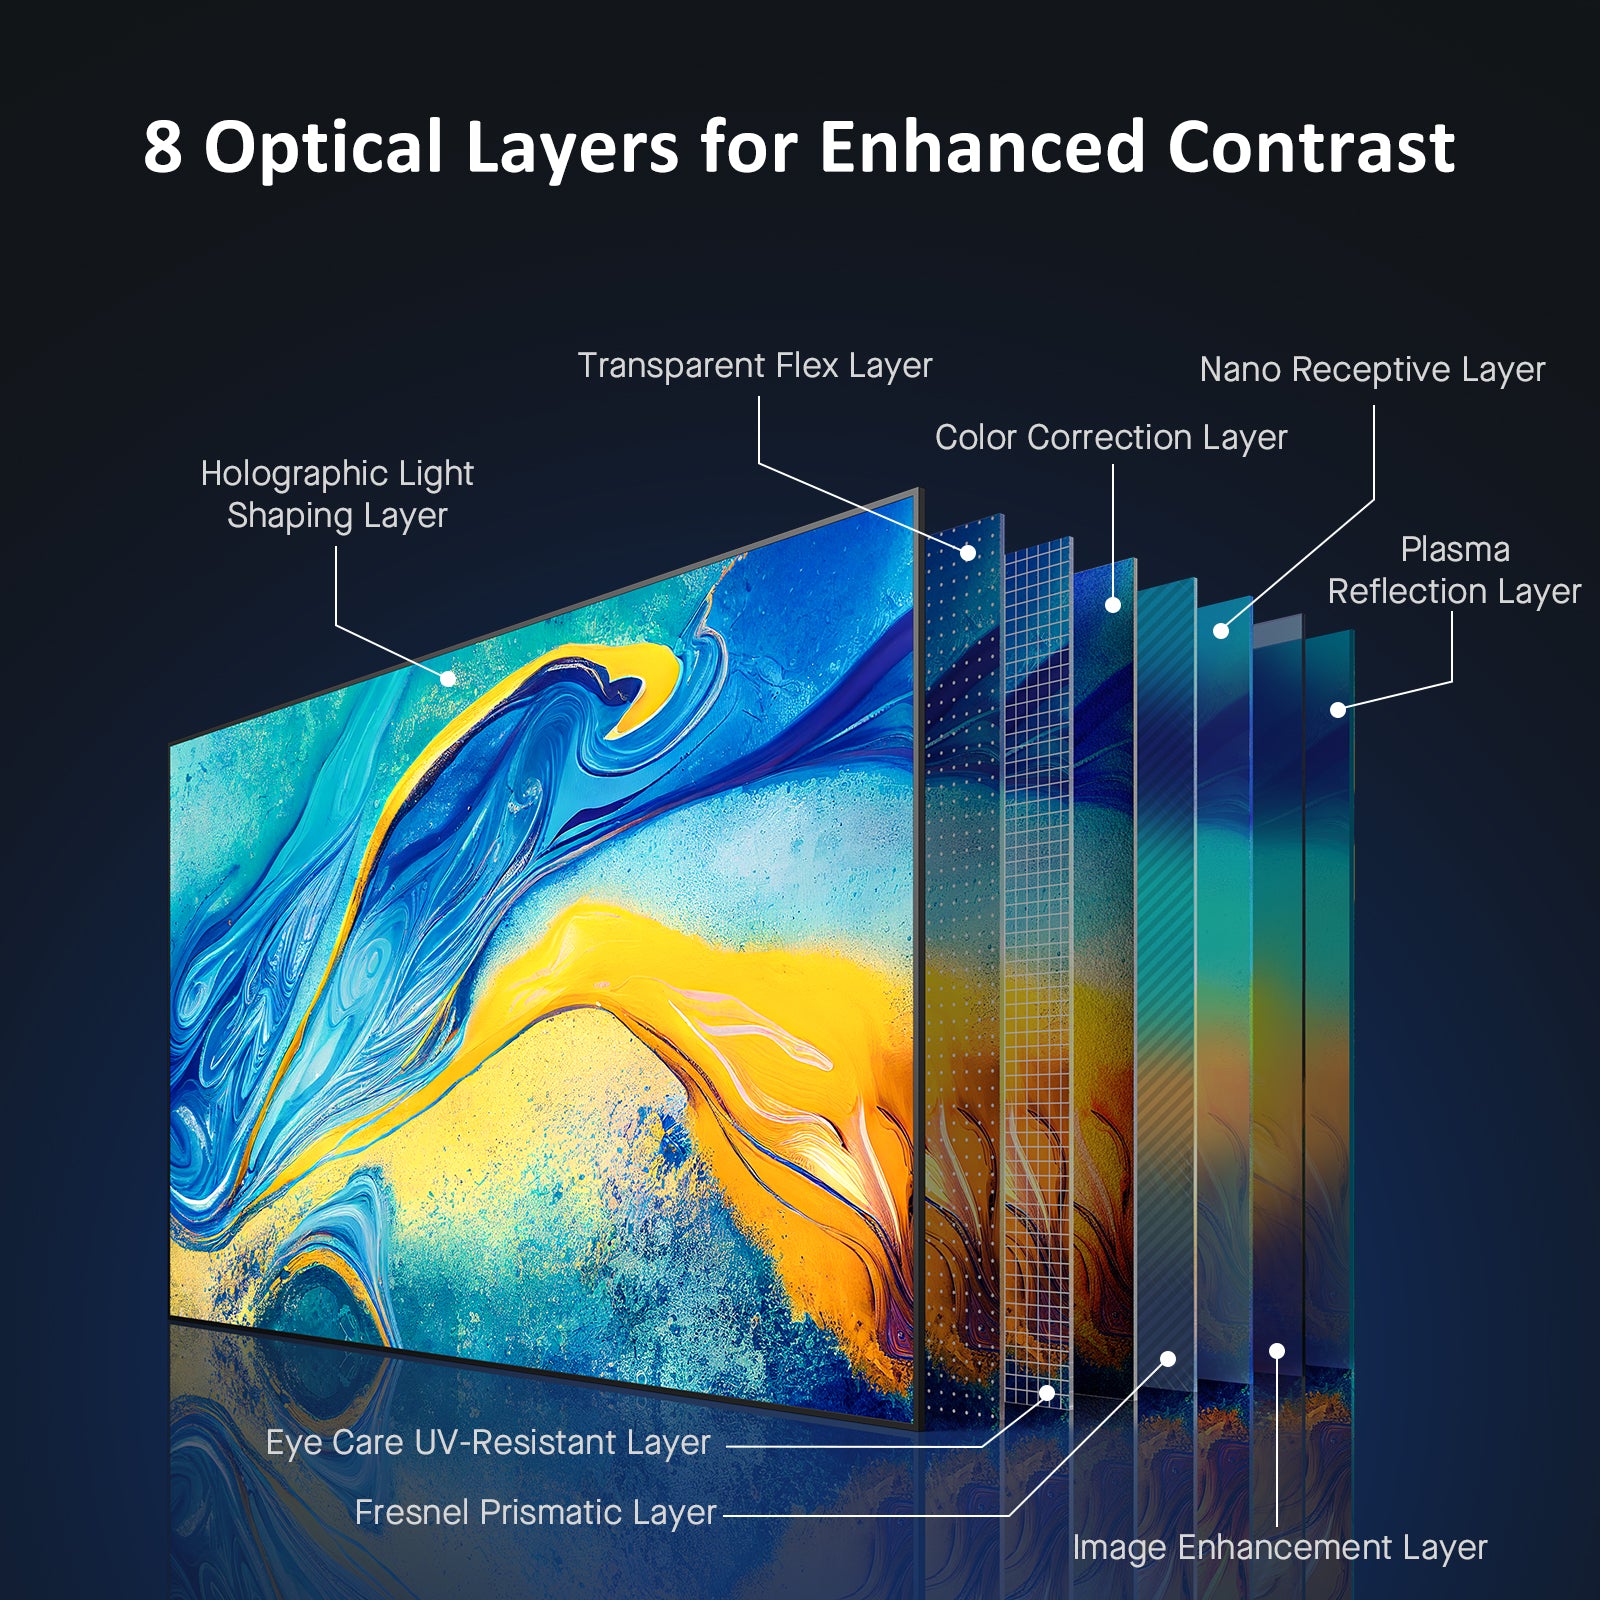 A contrast-enhancing picture of the 8-layer optical structure of the ALR-F100 anti-light screen